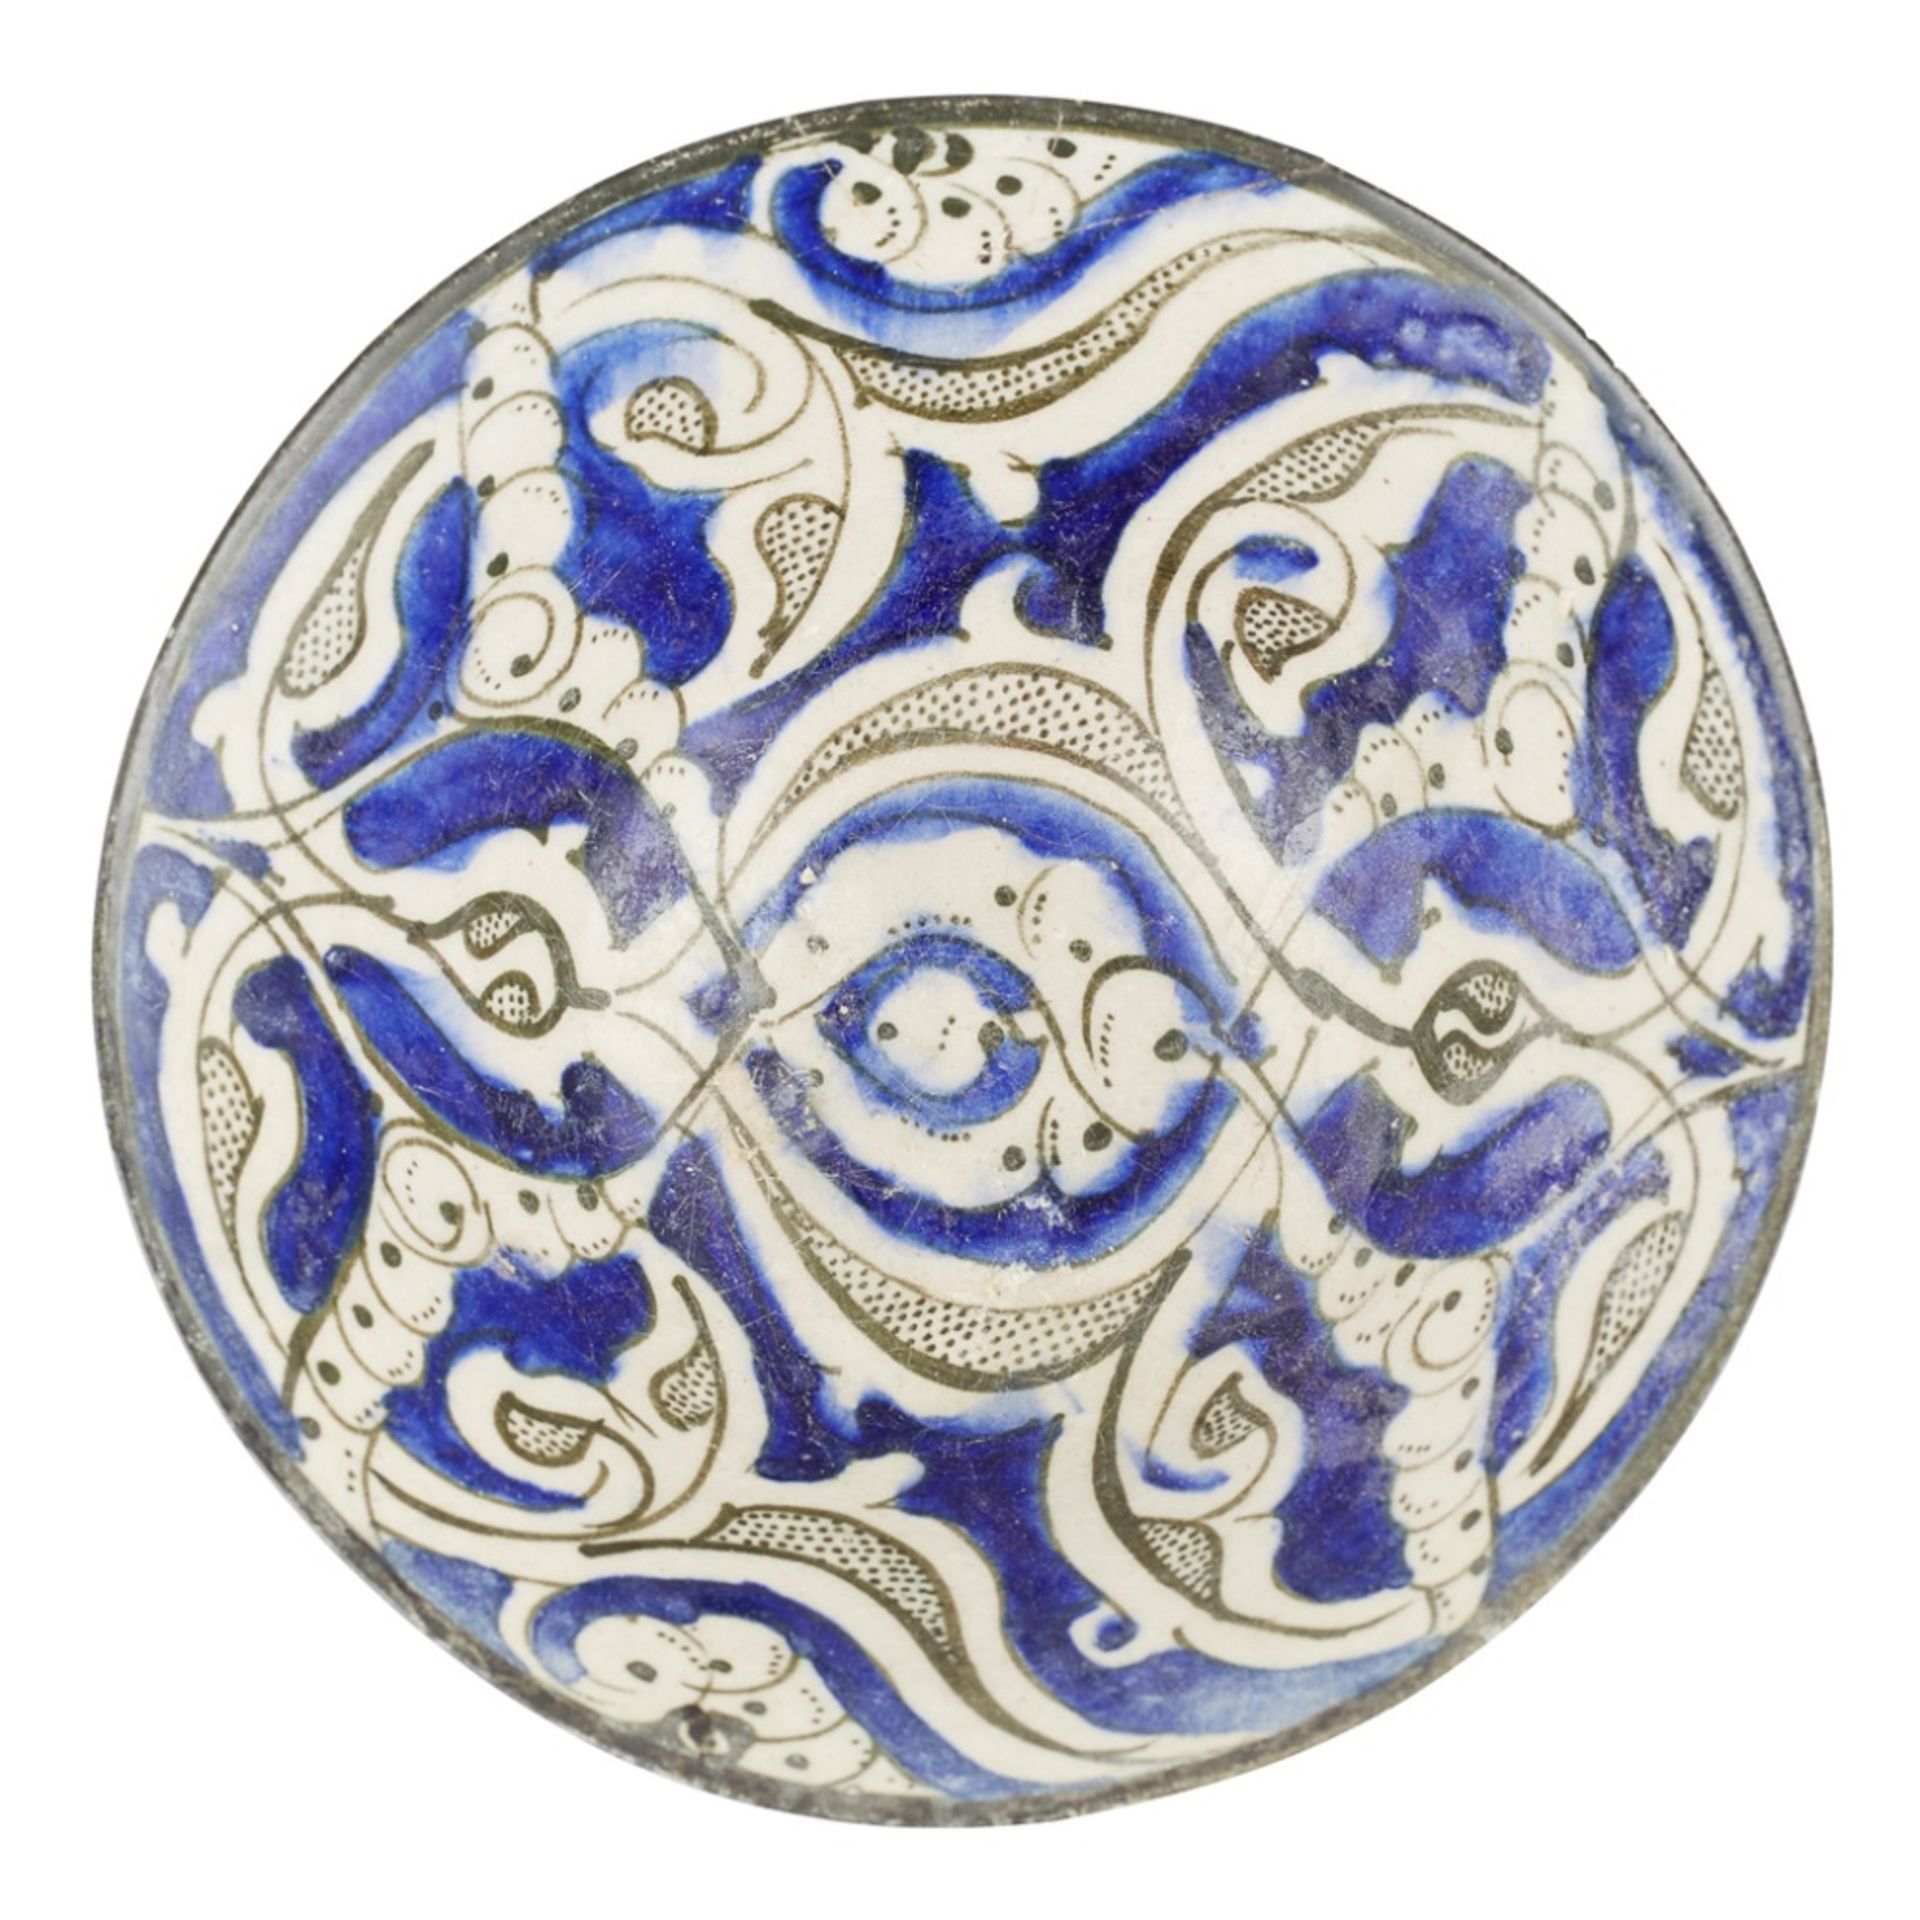 KASHAN BLUE AND WHITE UNDERGLAZE-PAINTED POTTERY BOWLPERSIA, 13TH CENTURY of conical form on a short